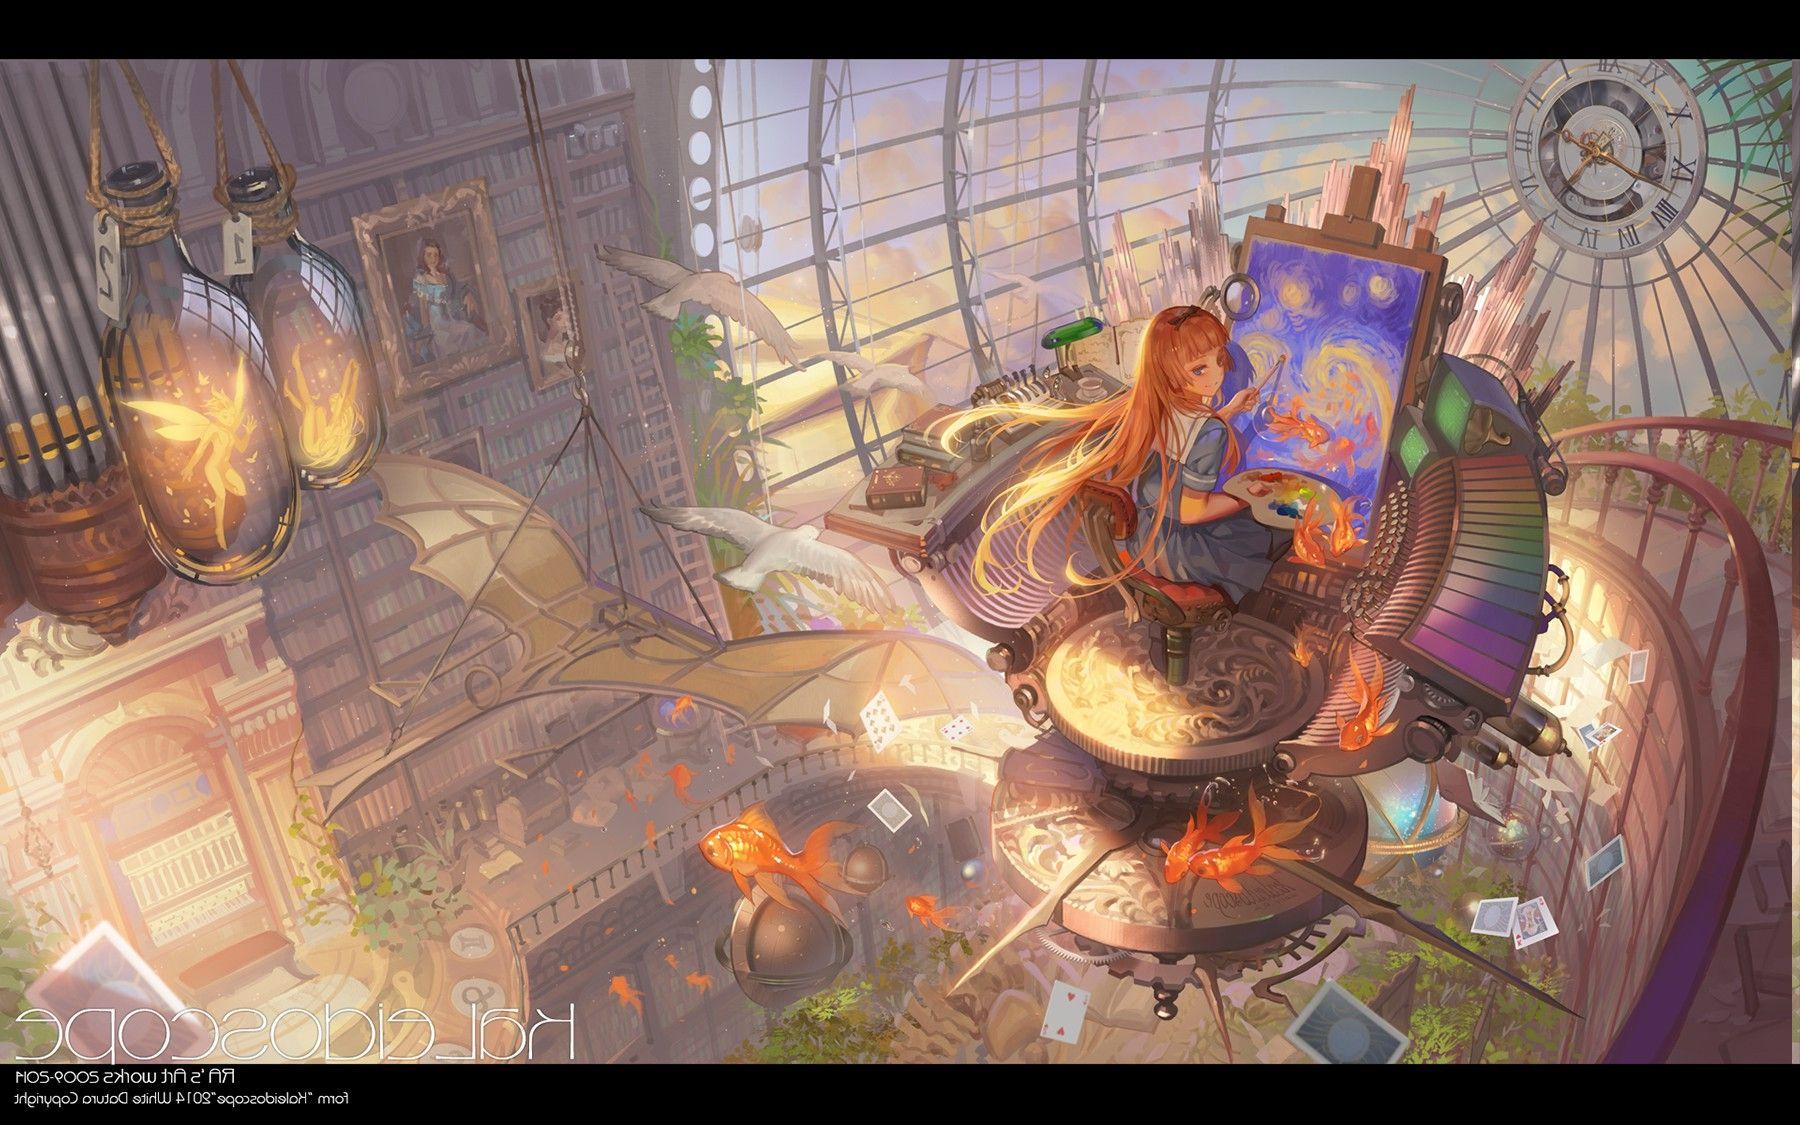 A library by Badriel on DeviantArt